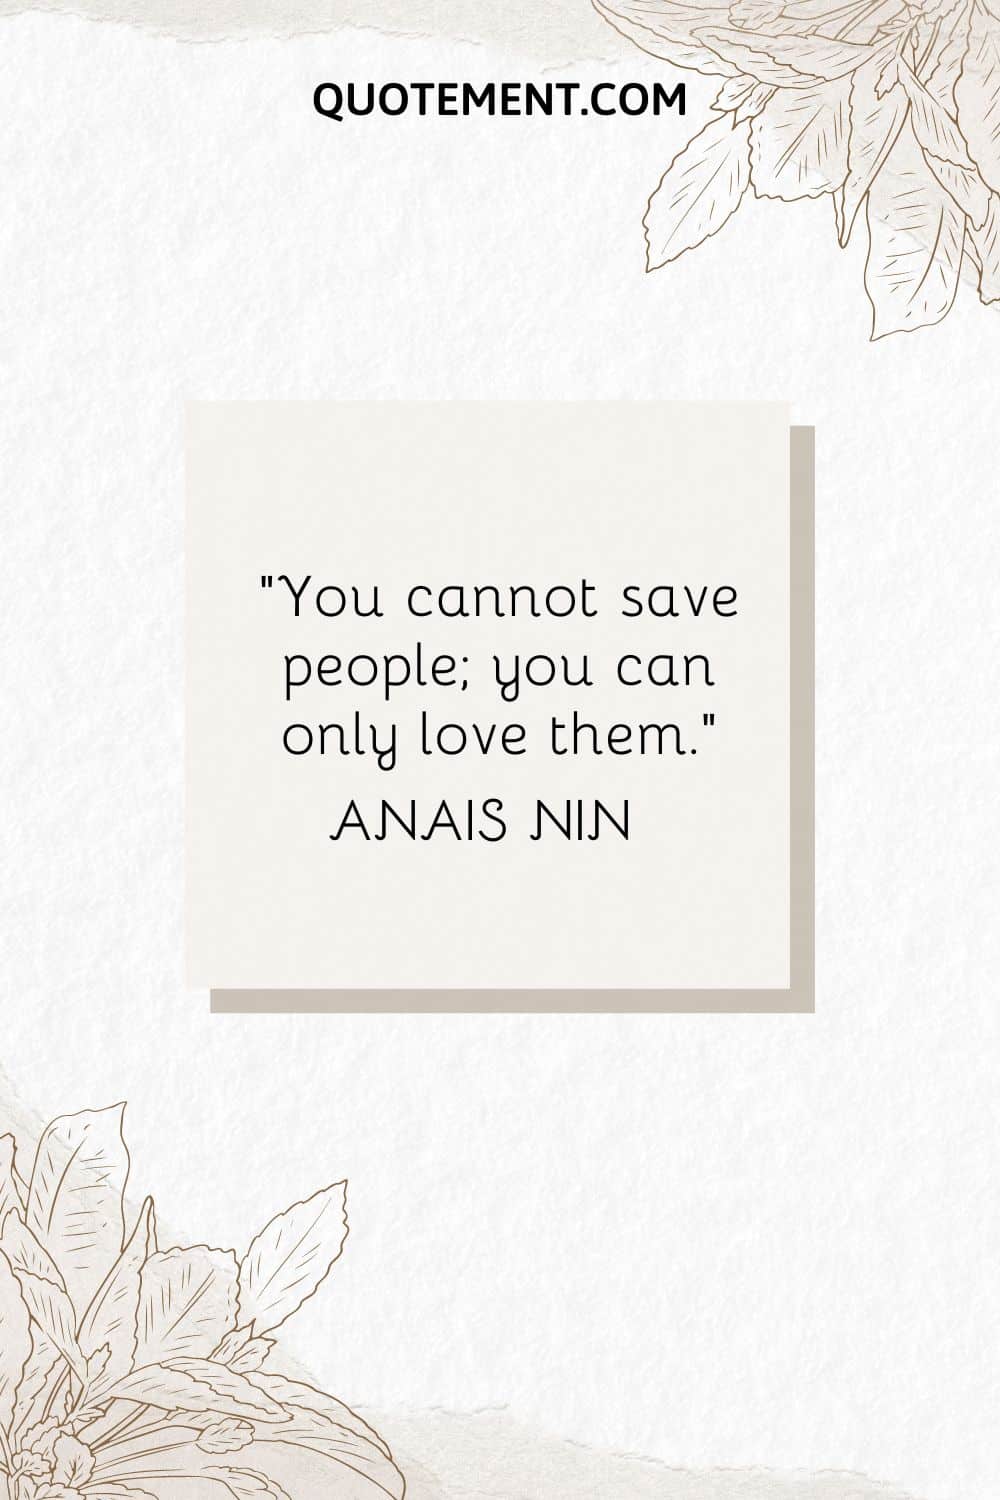 “You cannot save people; you can only love them.” — Anais Nin